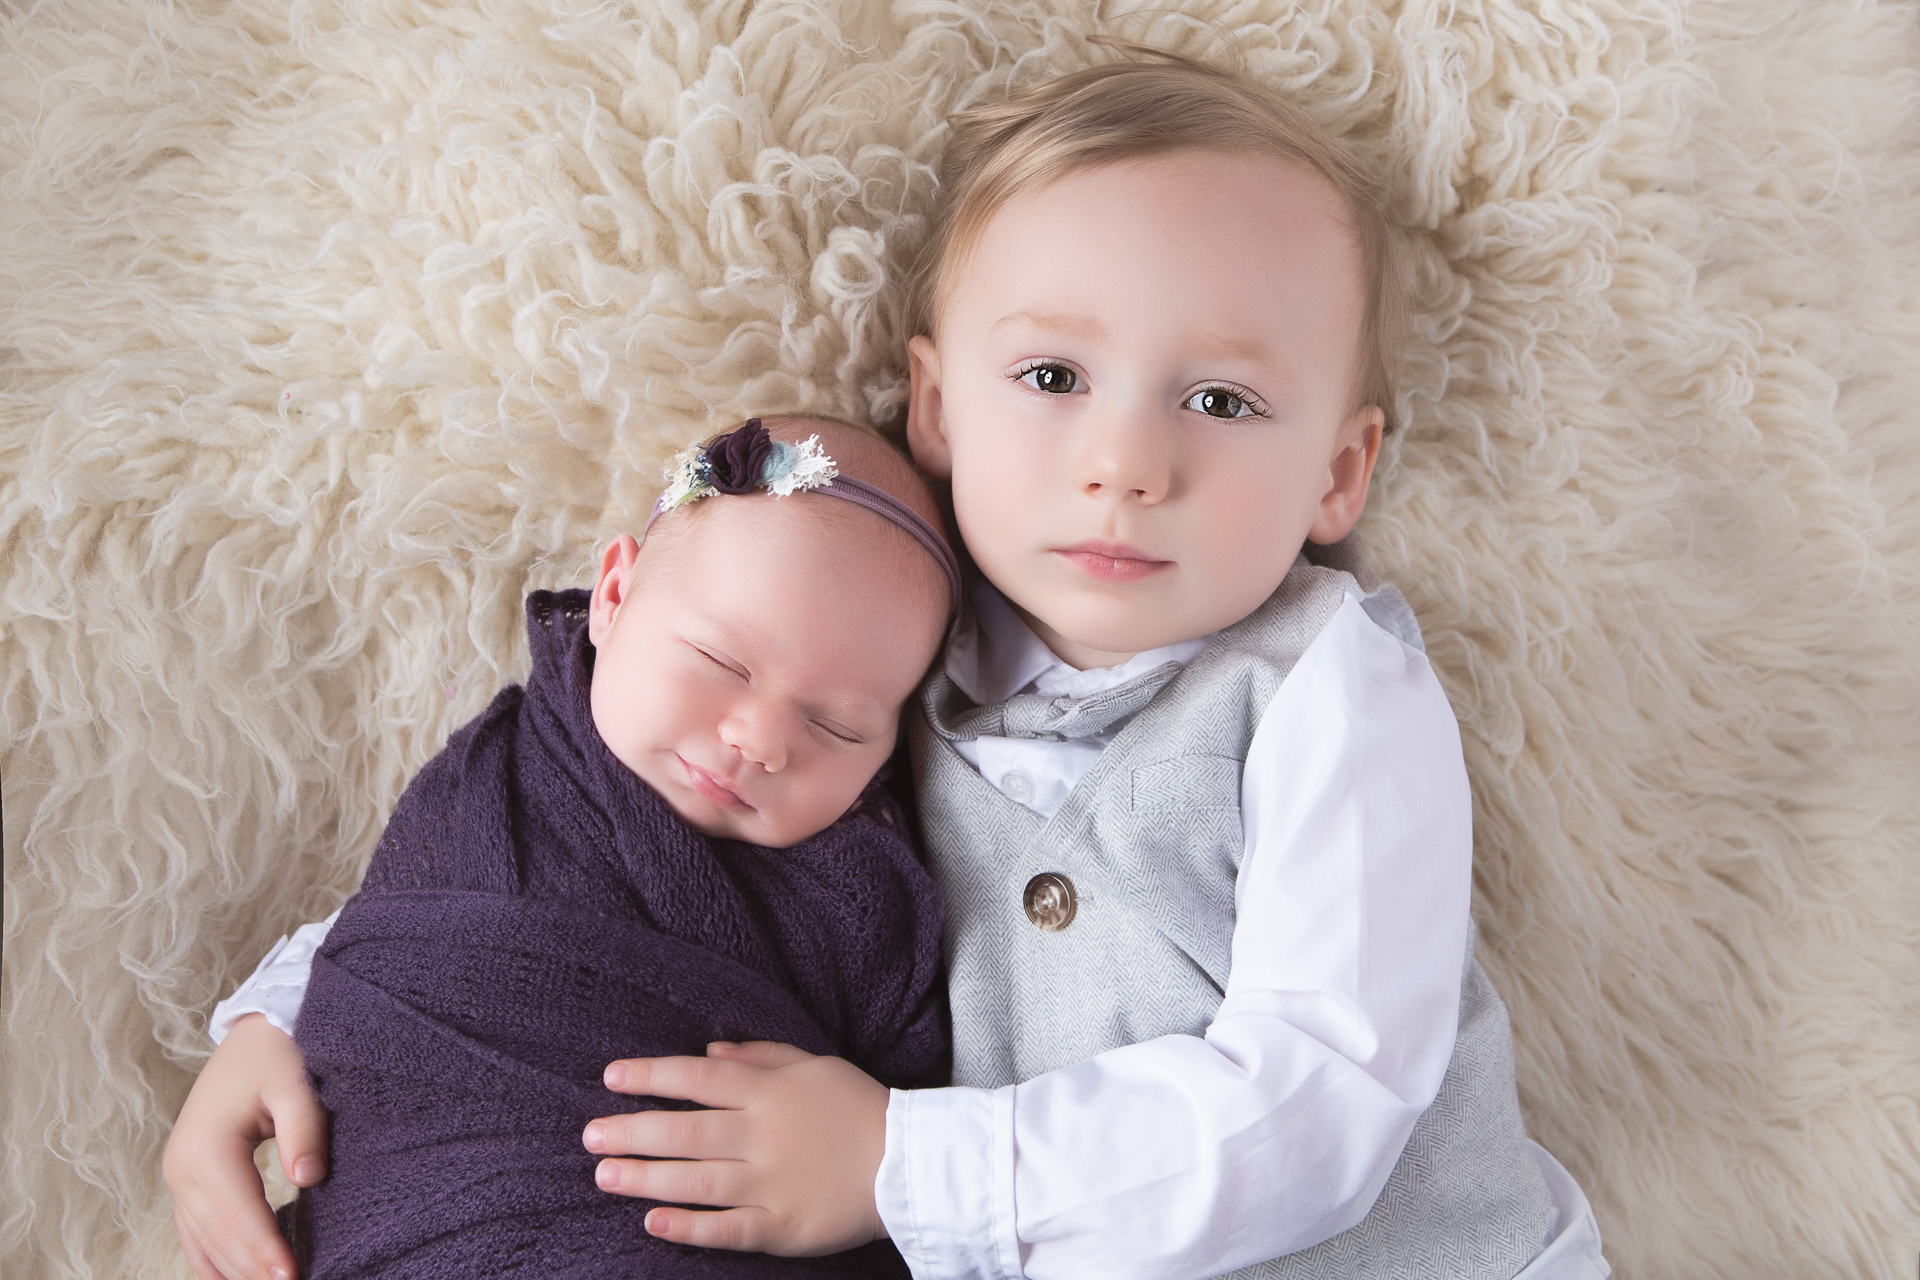 Toddler boy on gray suit holds his newborn sister which what dark purple wrap and headband. Light color carpet on background.